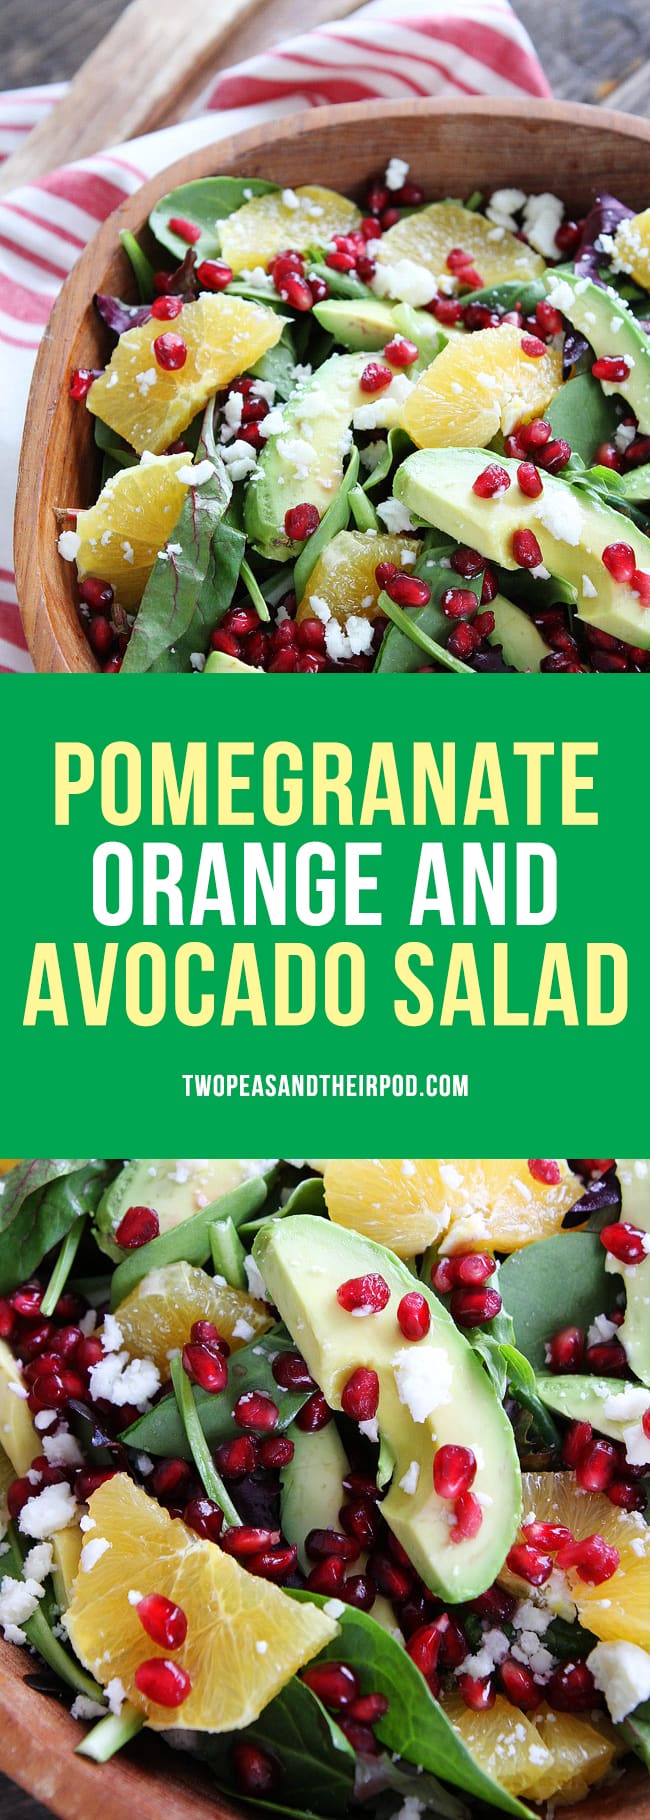 Pomegranate Orange and Avocado Salad is the perfect salad for the holidays! Everyone loves this healthy, fresh, and festive salad! #Christmas #holidays #salad #glutenfree #pomegranate #orange #avocado